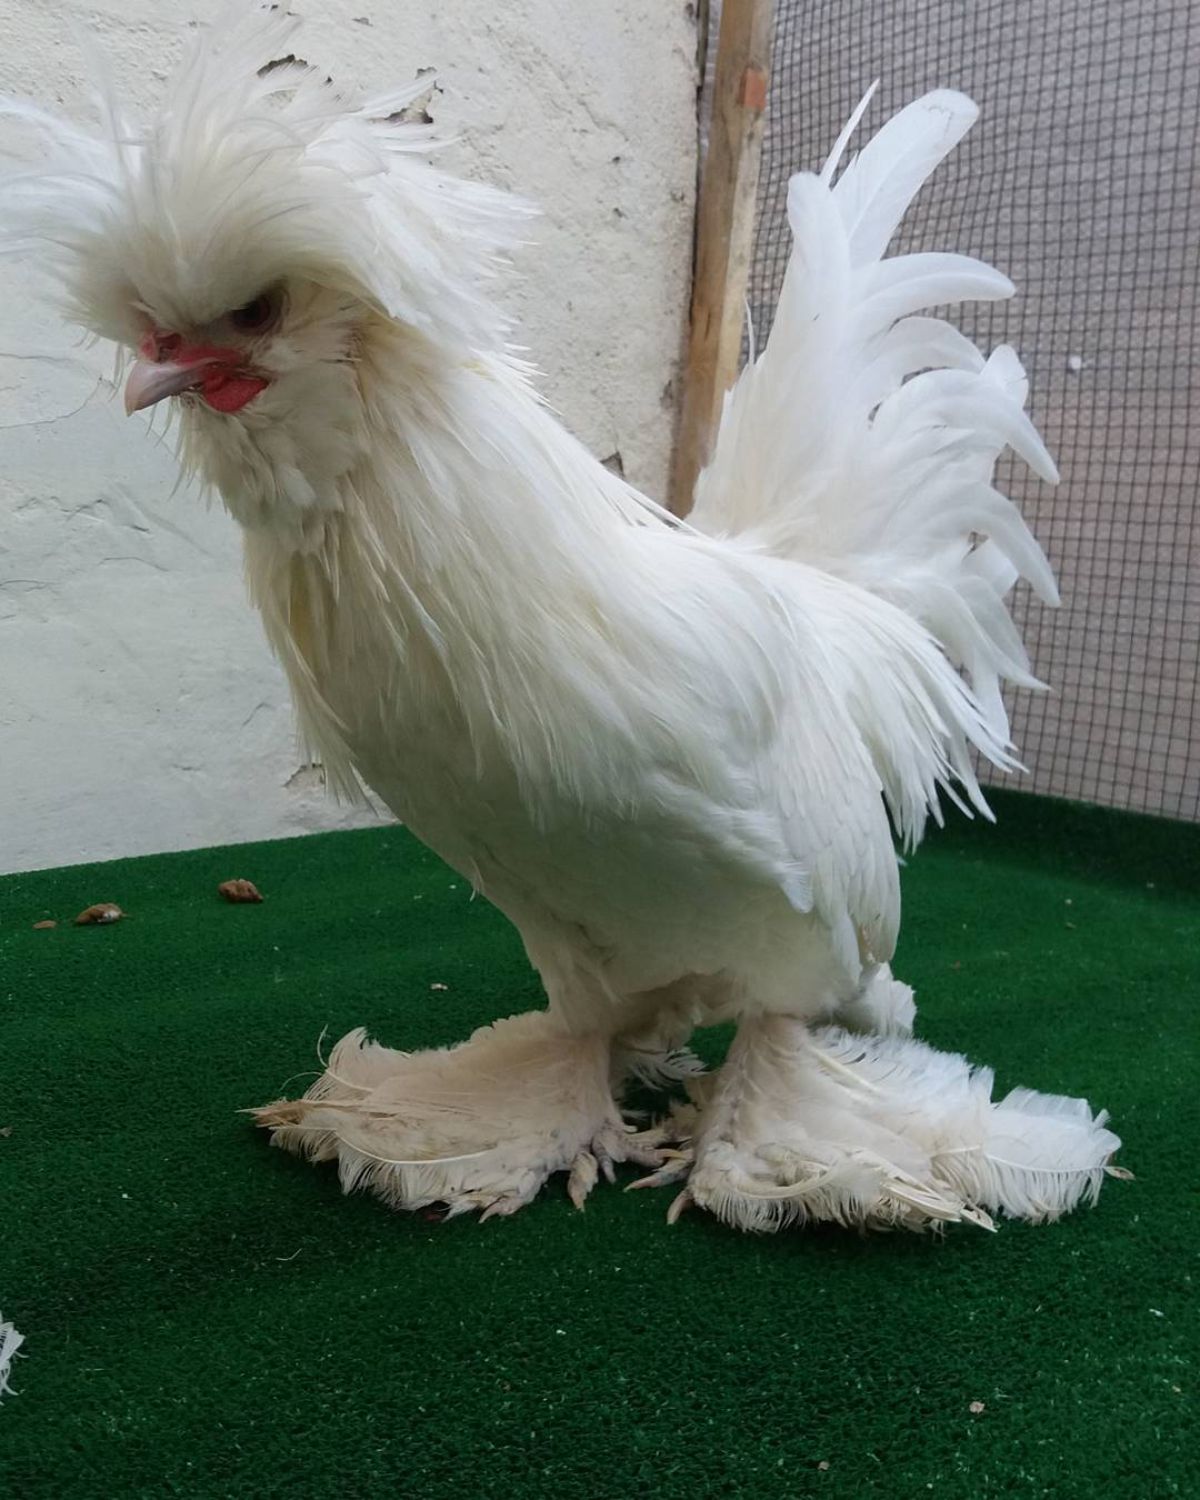 Adorable white Sultan chicken standing on a green floor.